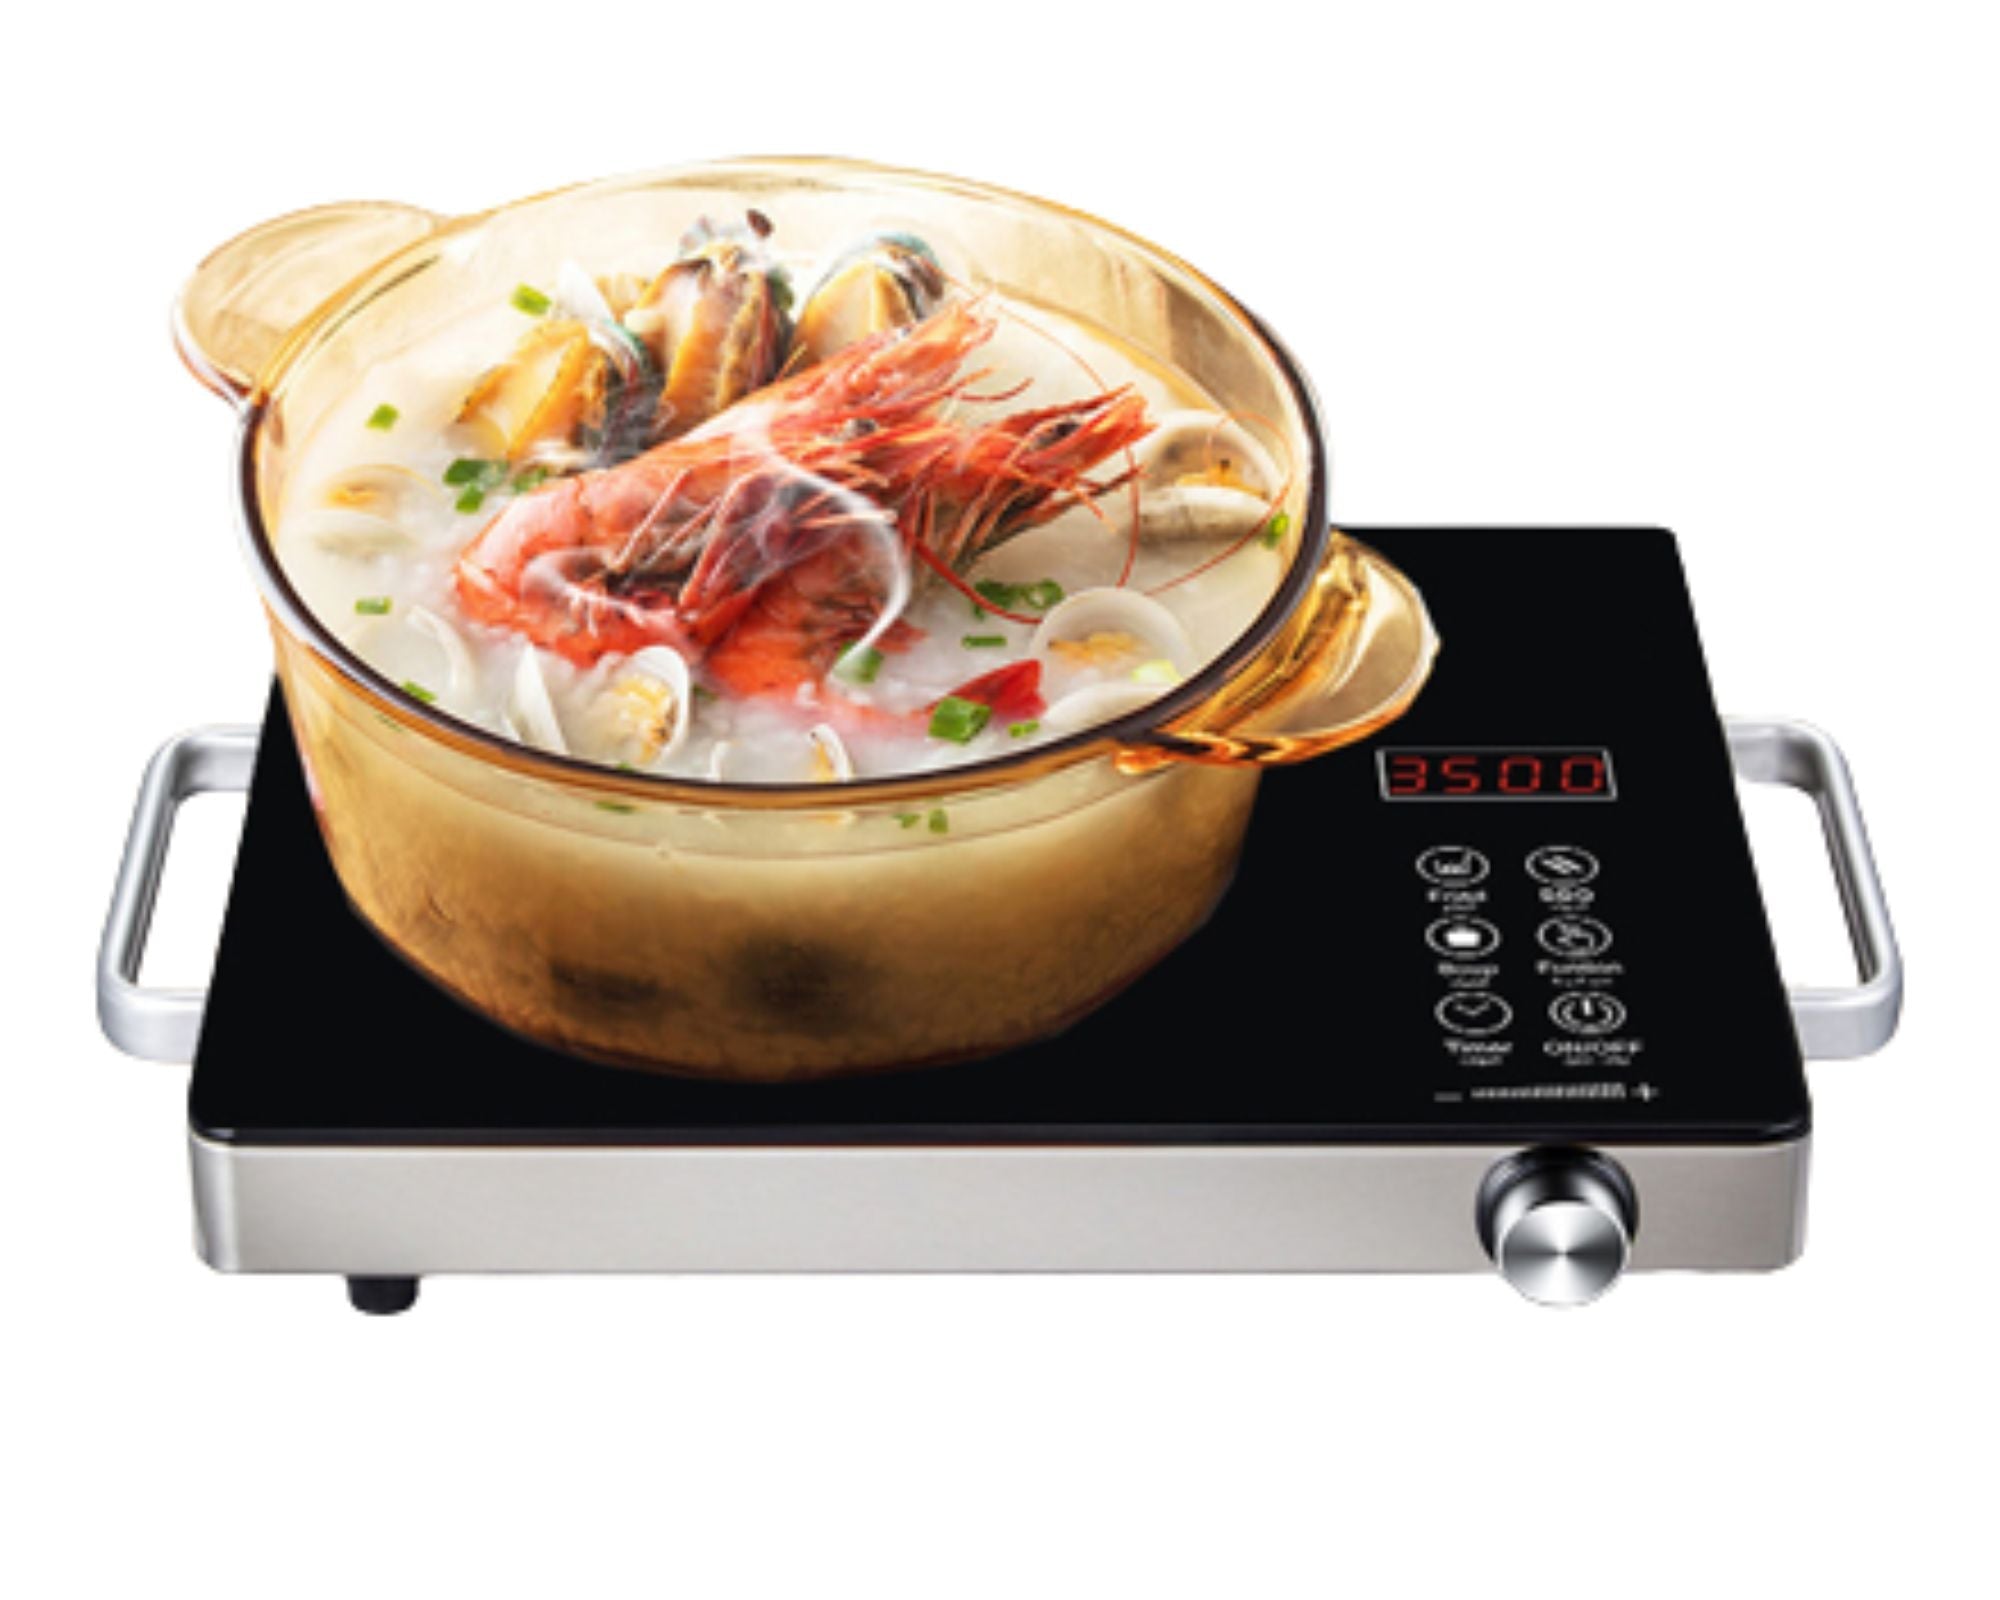 Induix - Portable Electric Induction Hob